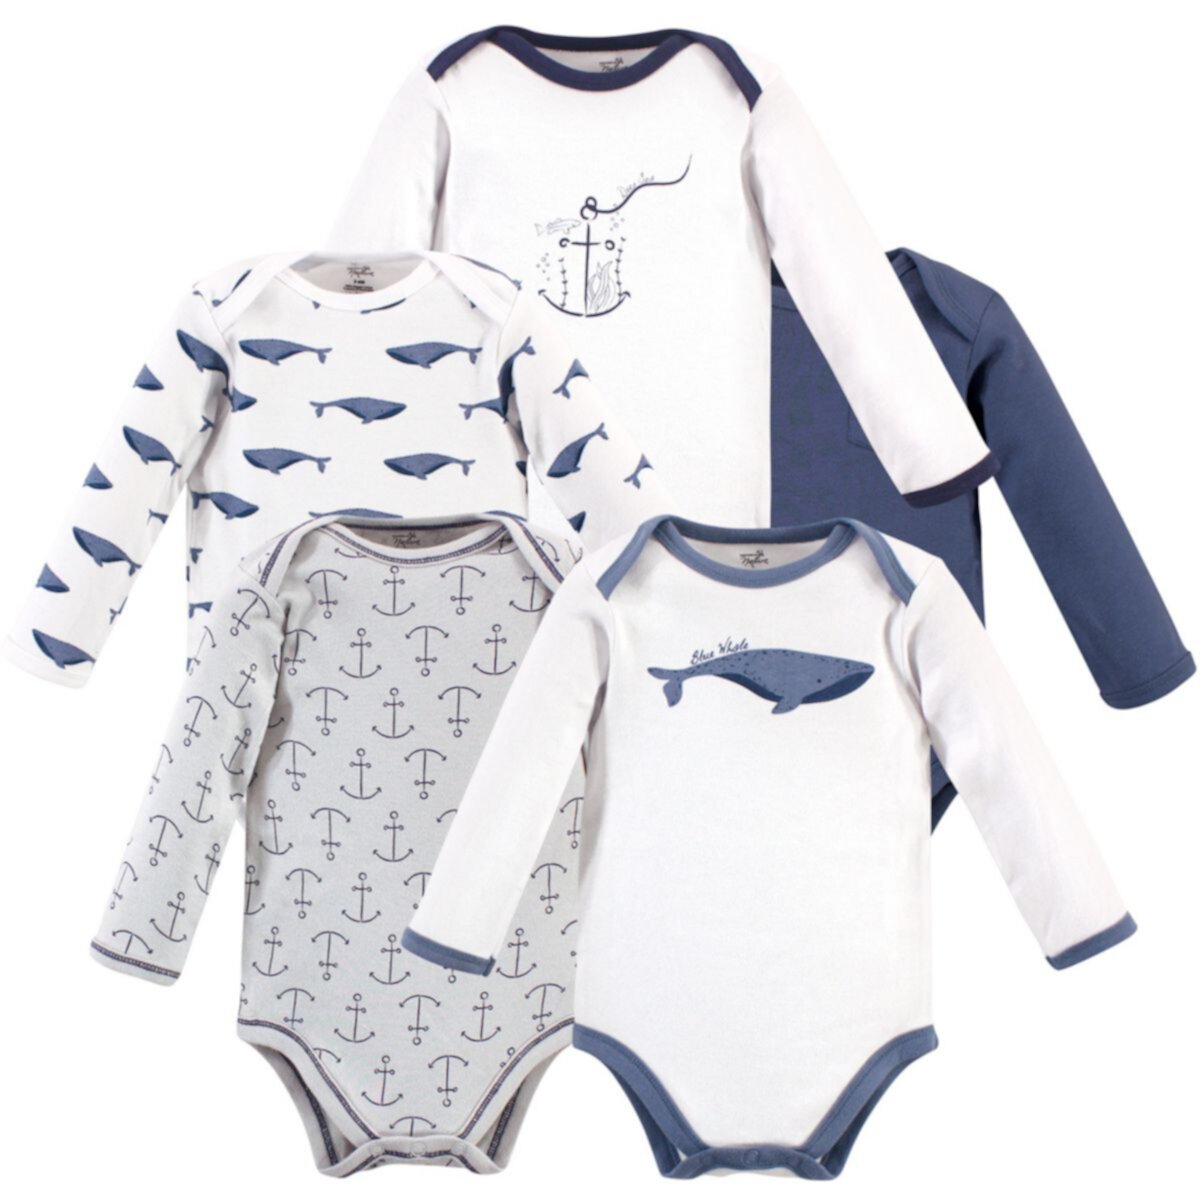 Touched by Nature Organic Cotton Long-Sleeve Bodysuits 5pk, Blue Whale Touched by Nature